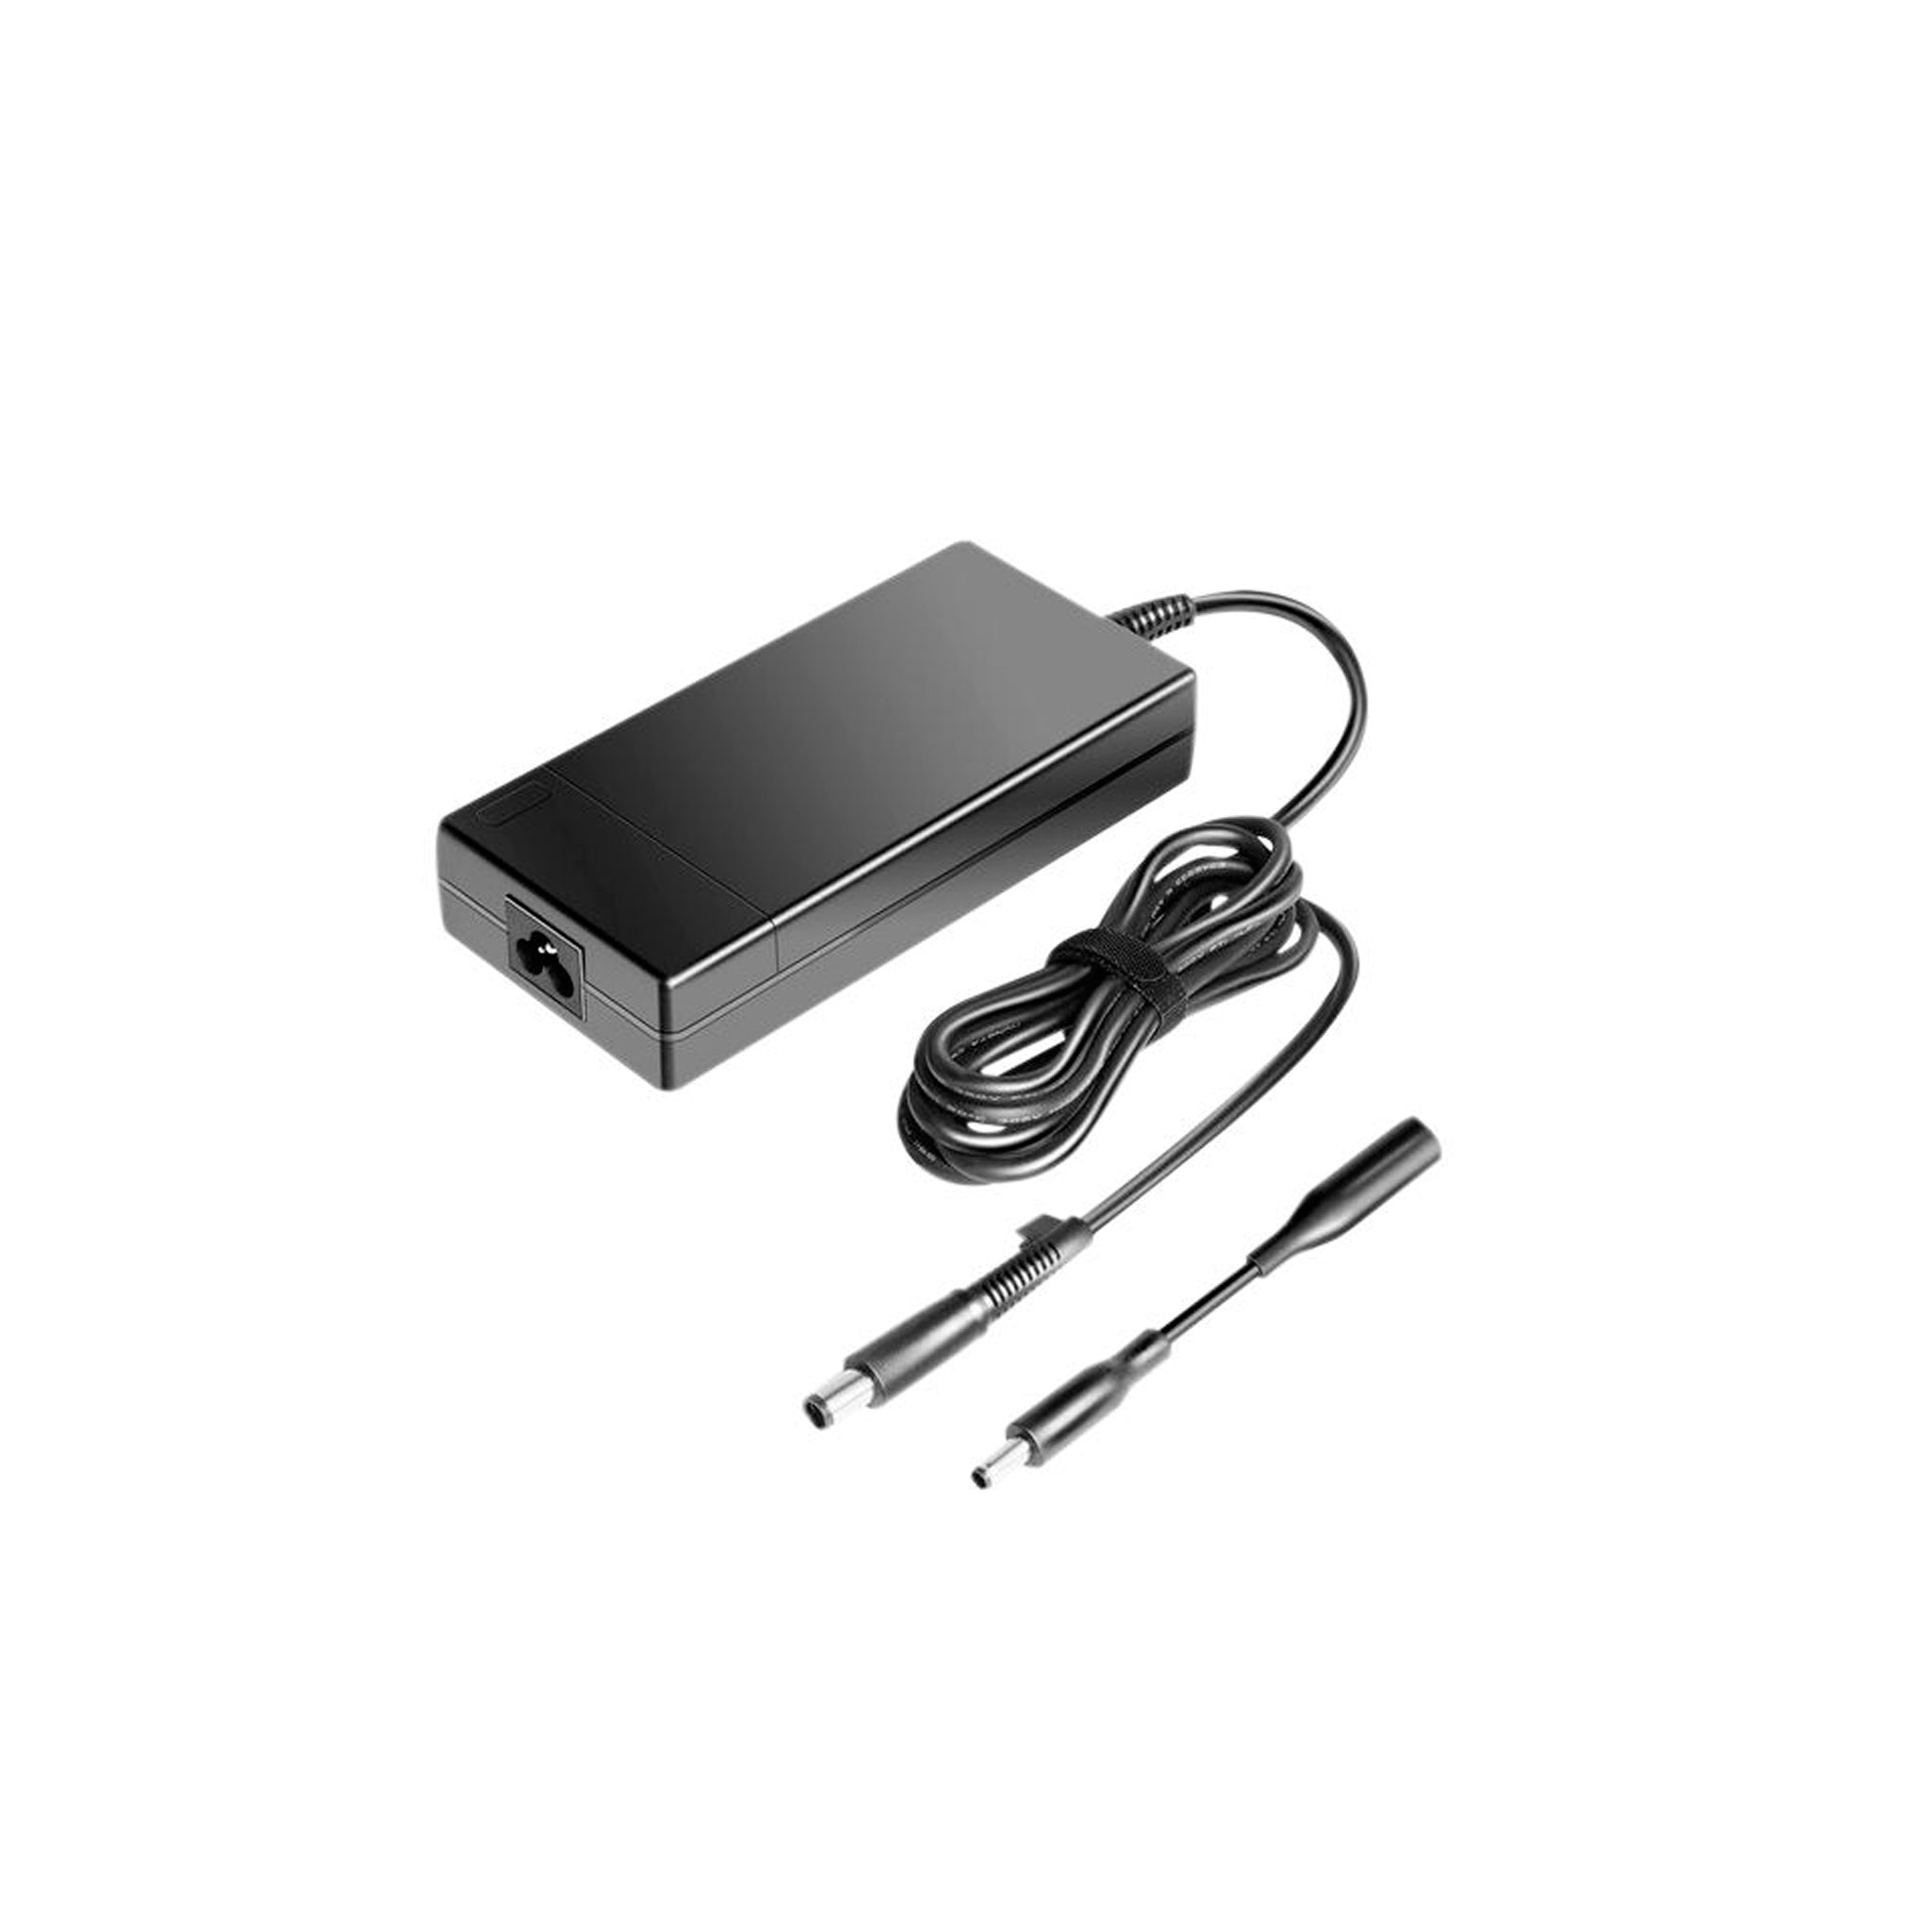 Bti - Ac Power Adapter 180w For Most Alienware Laptops - Black